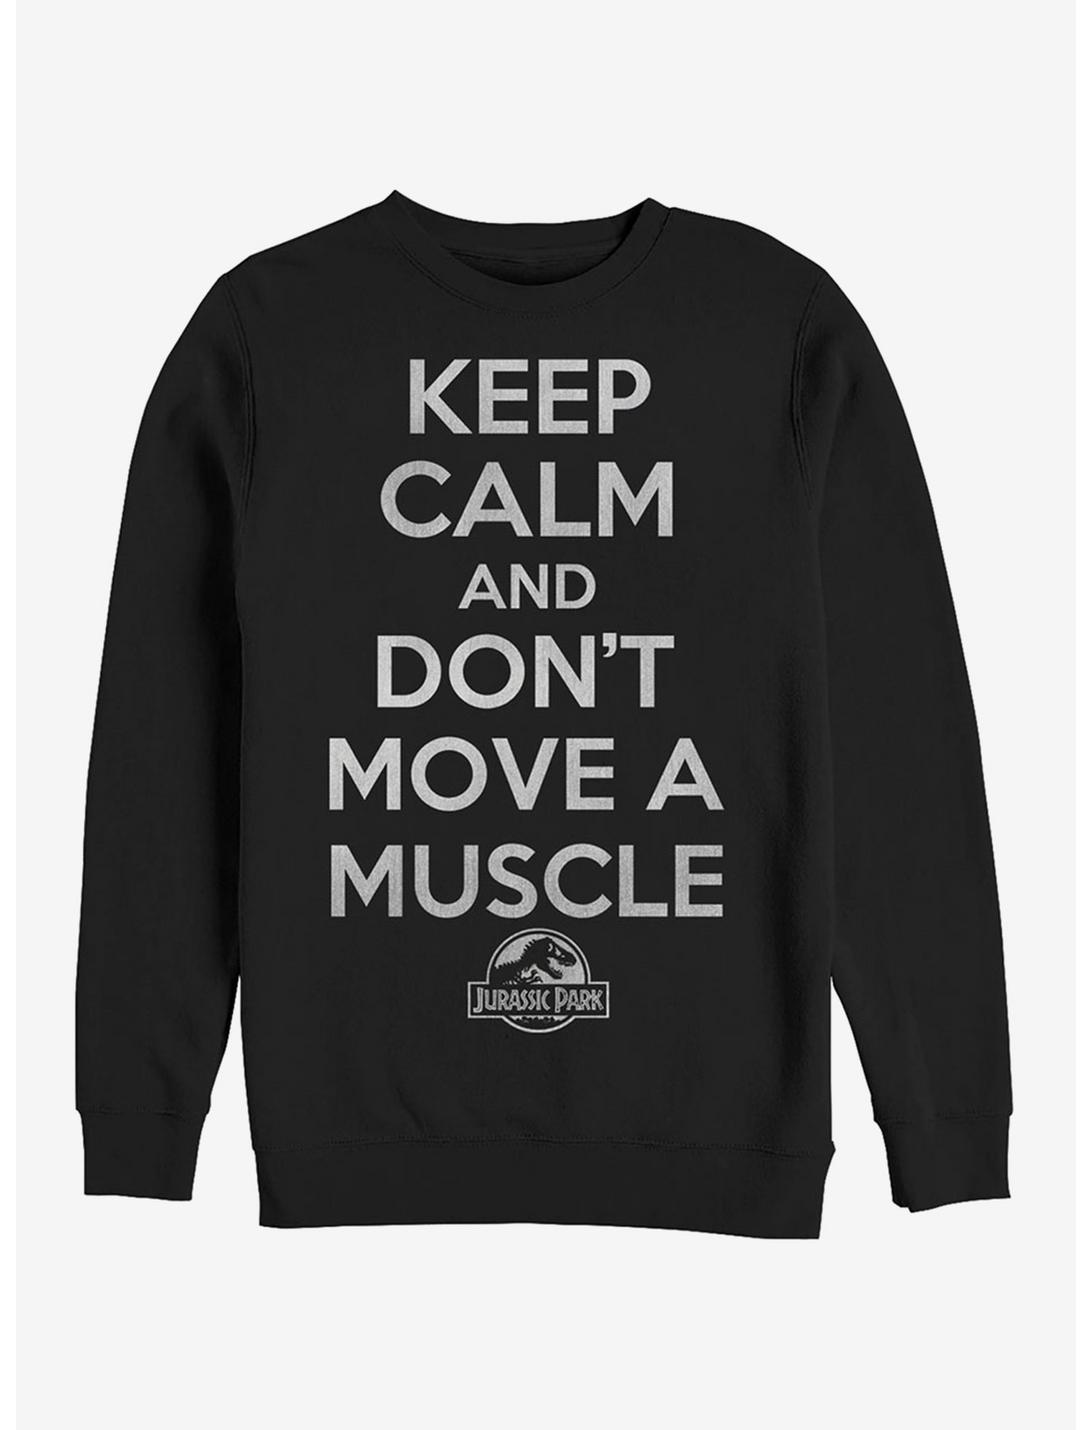 Keep Calm and Don't Move a Muscle Sweatshirt, BLACK, hi-res